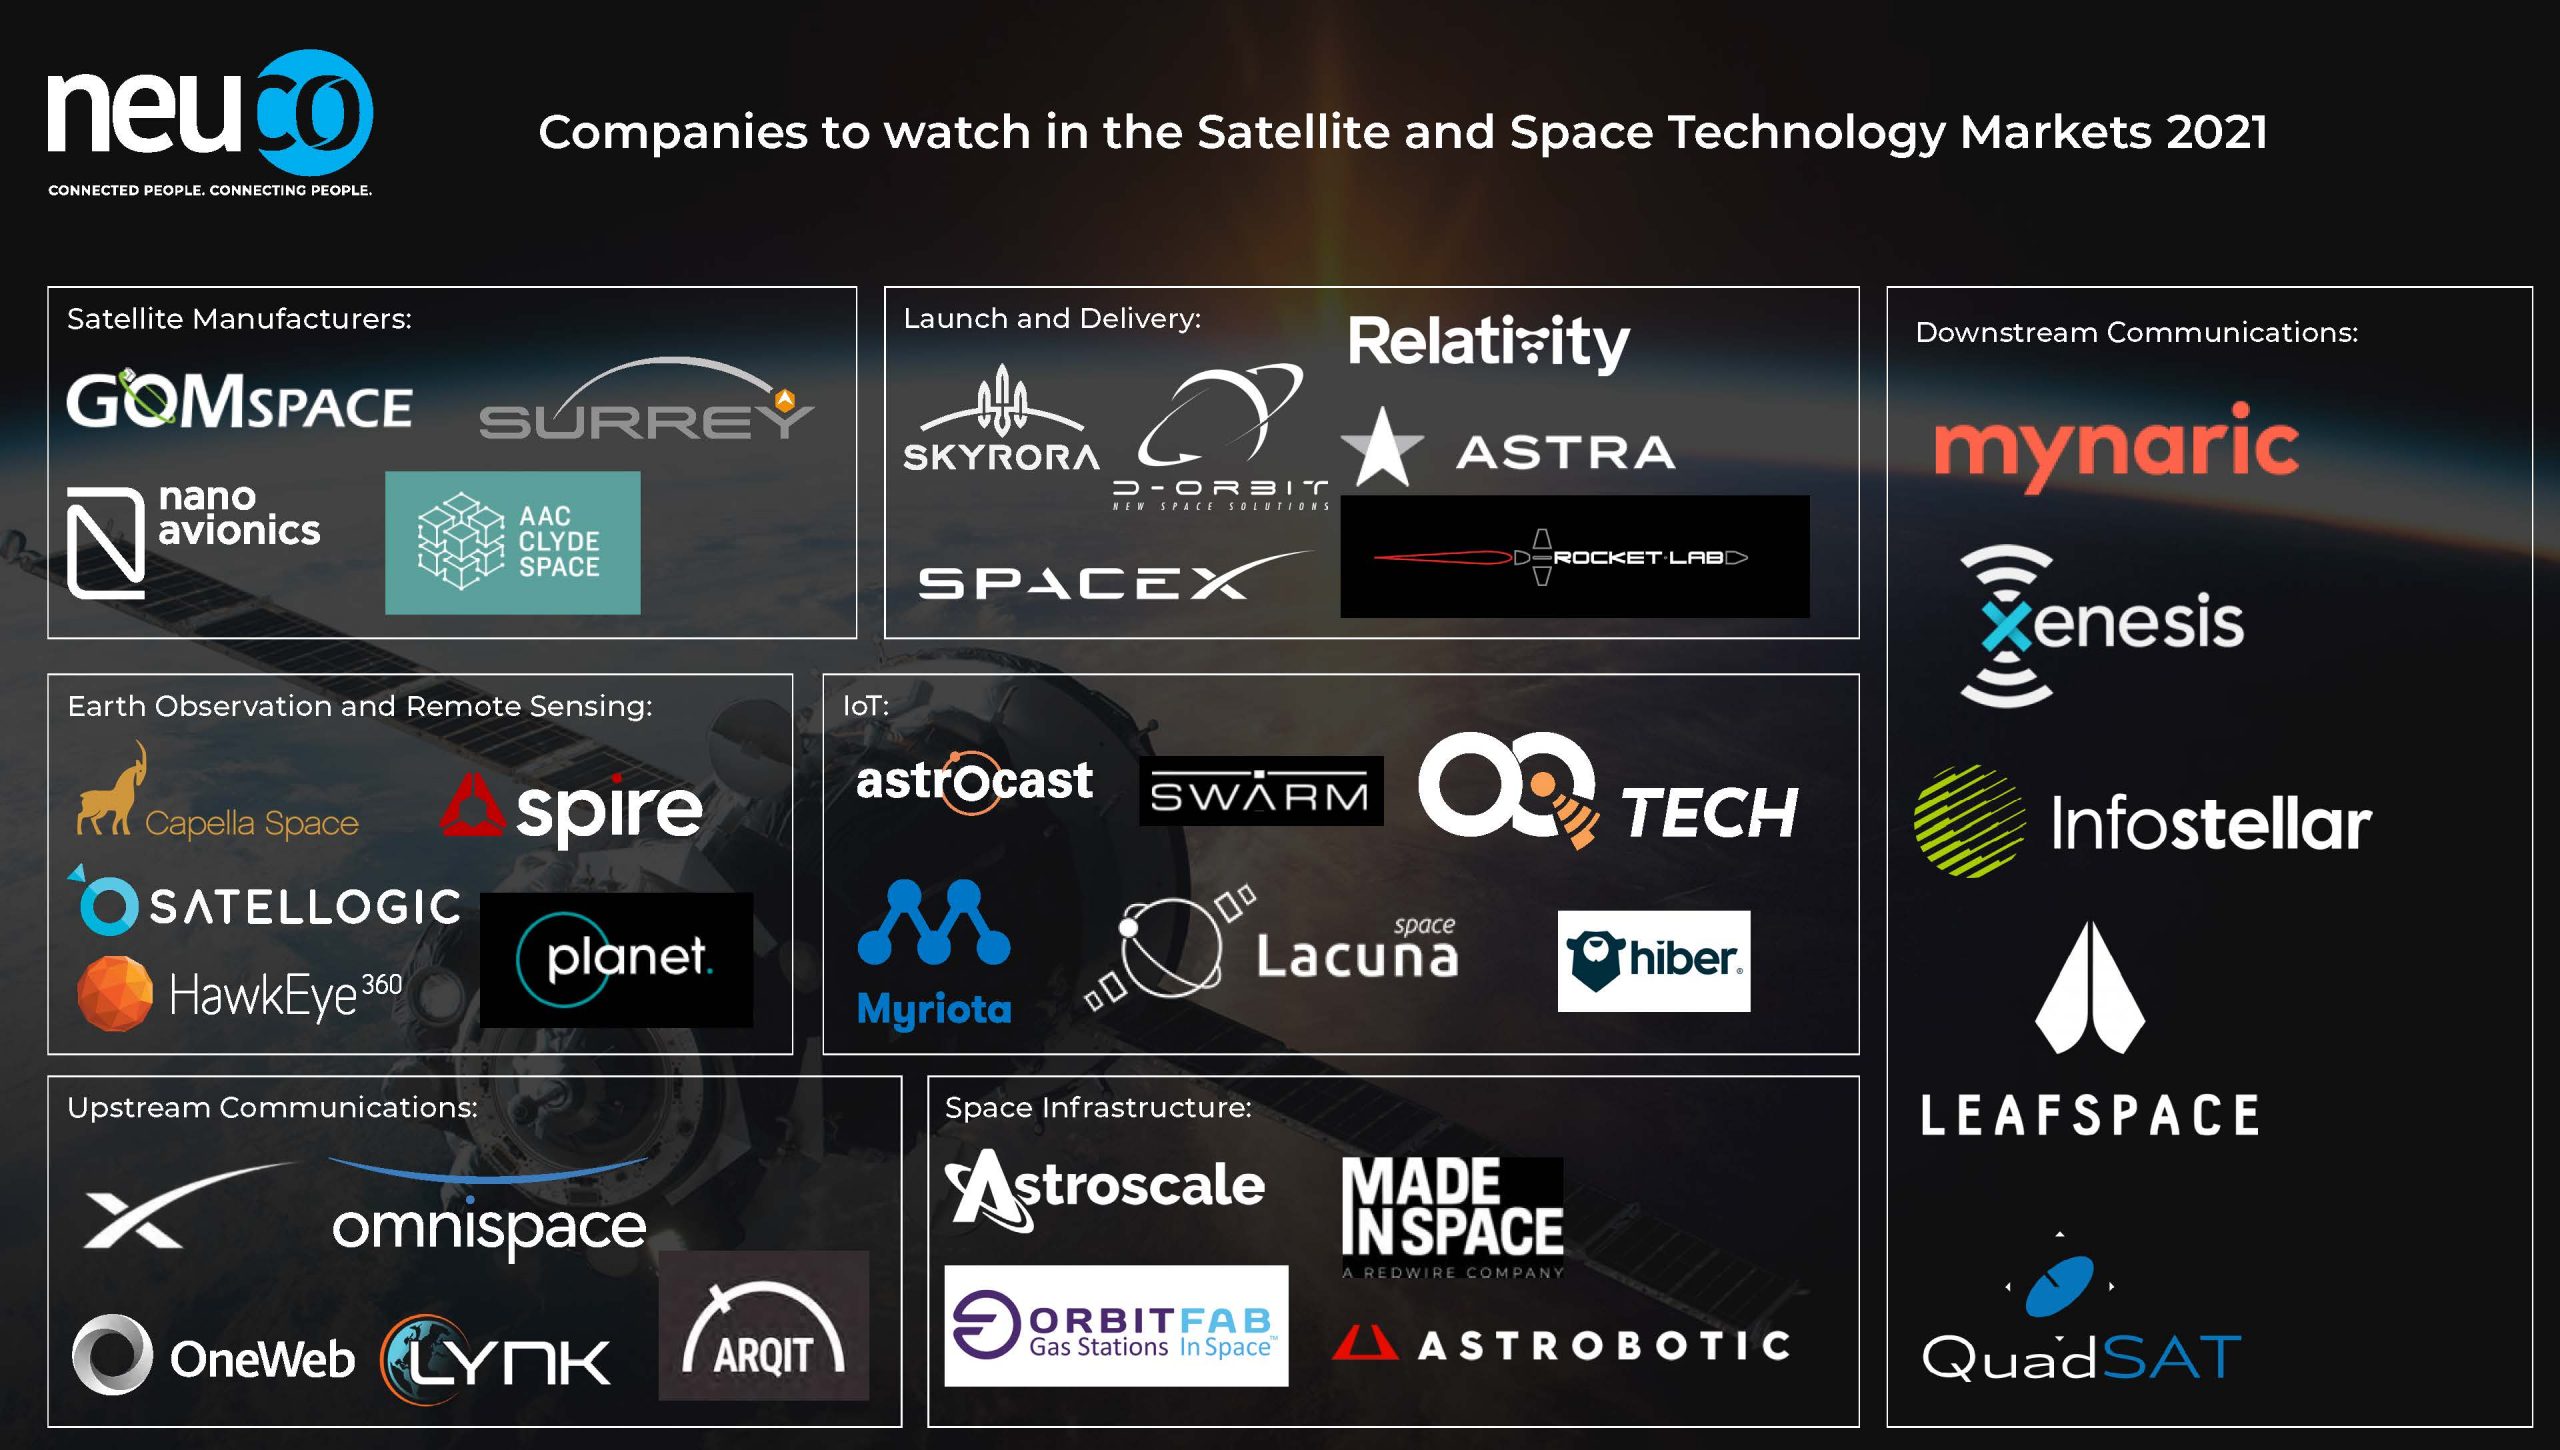 Companies to watch in the Satellite and Space Technology Markets 2021